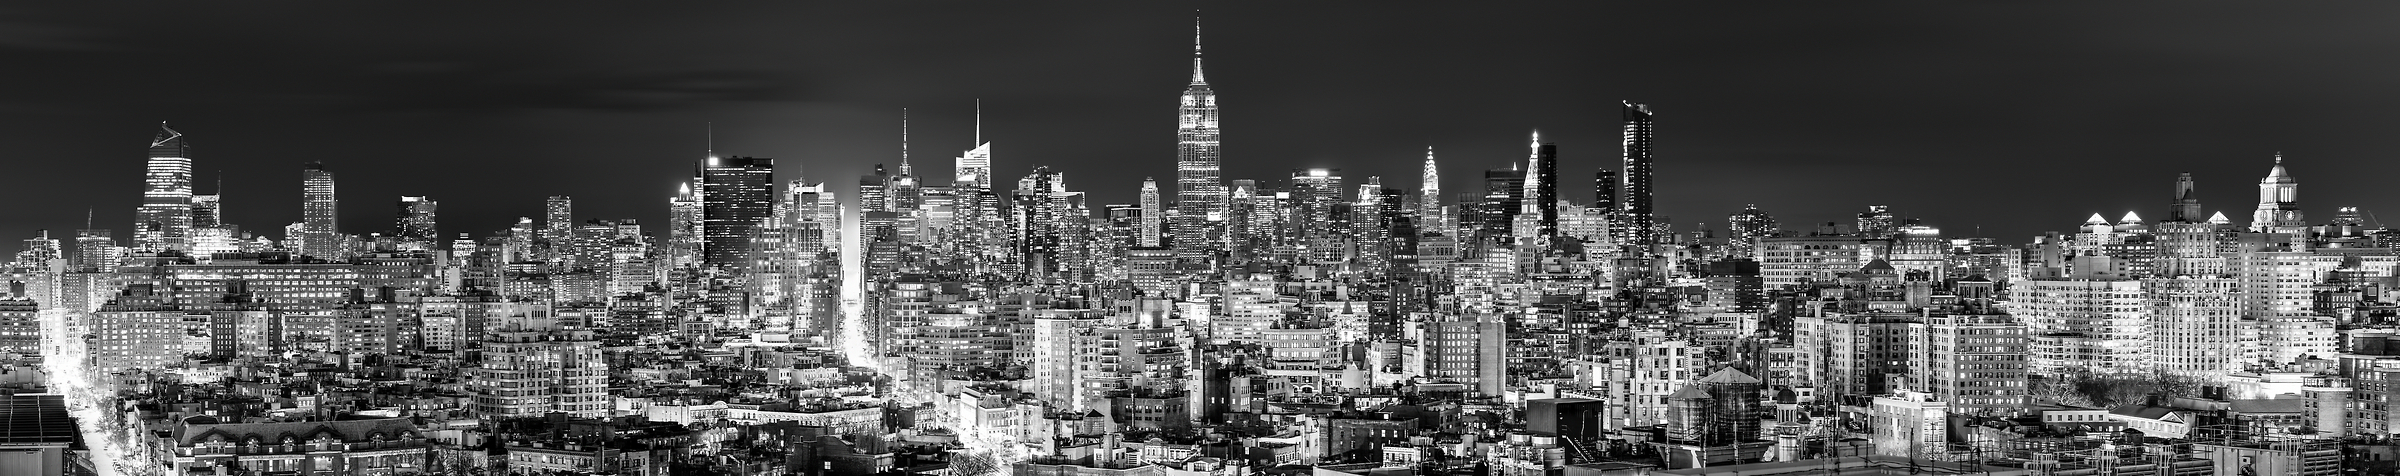 2,832 megapixels! A very high resolution, large-format VAST photo print of the Manhattan, New York City skyline at night; cityscape photo created by Dan Piech